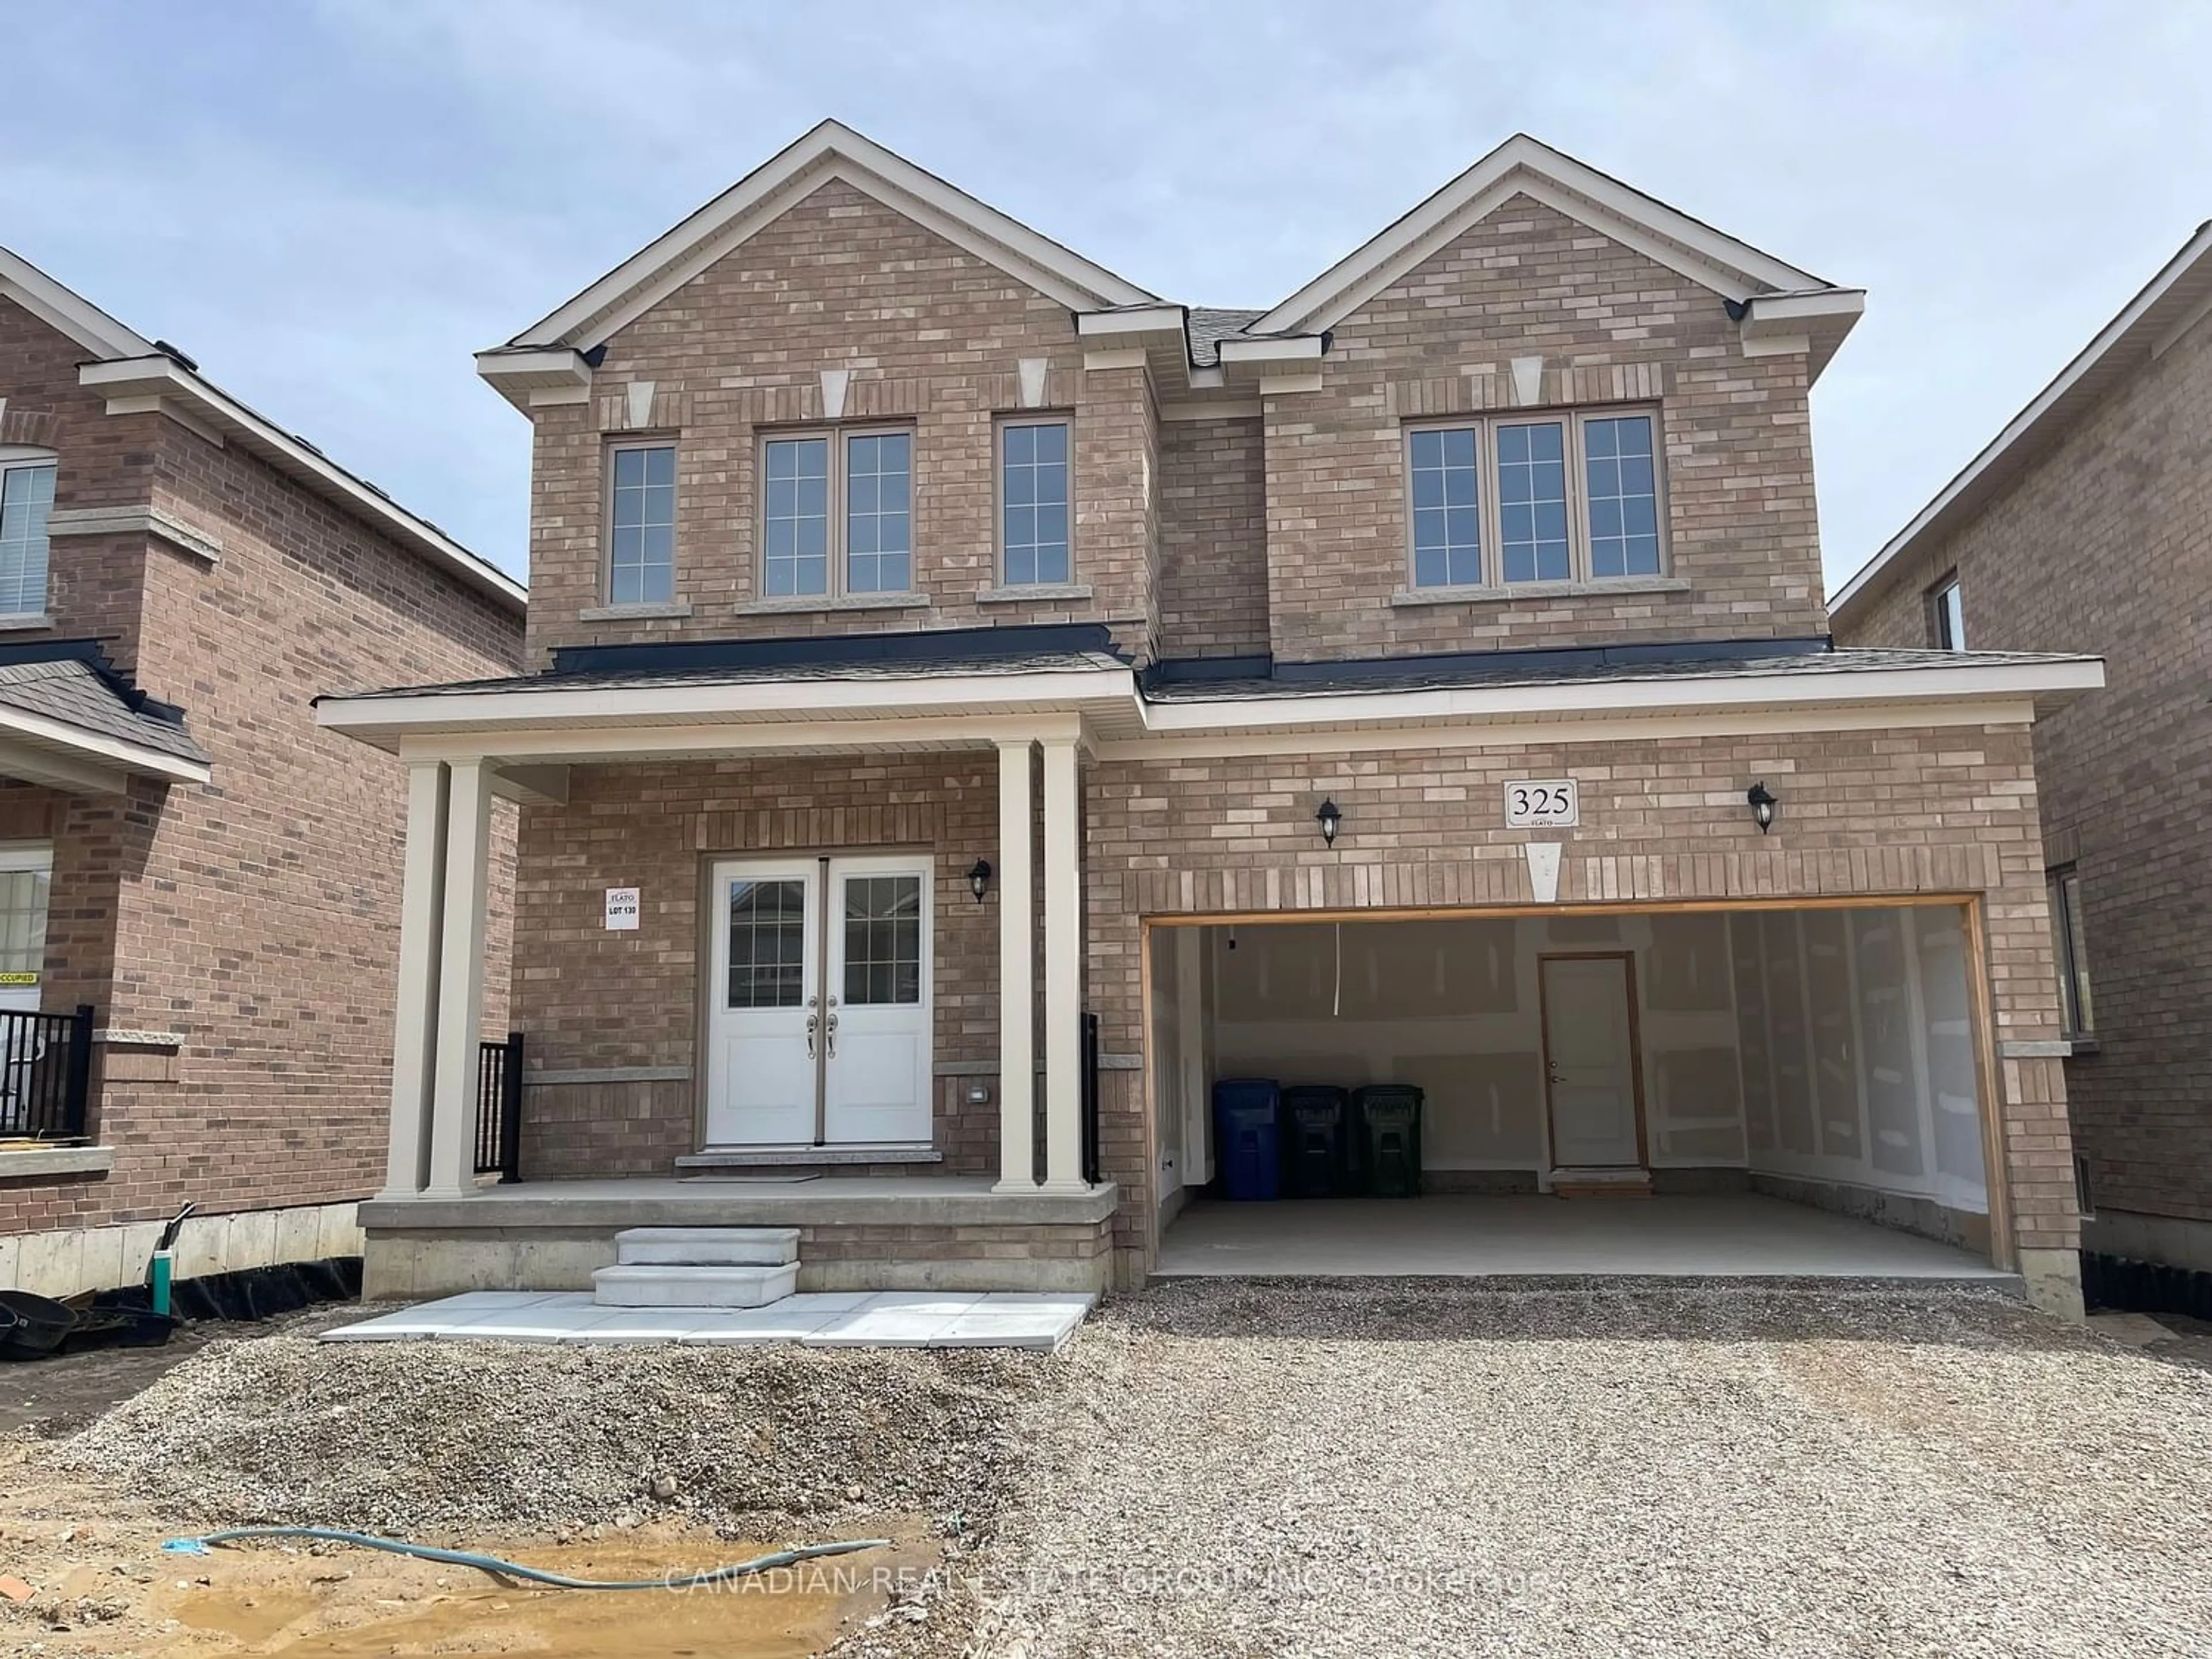 Home with brick exterior material for 325 Moody St, Southgate Ontario N0C 1B0